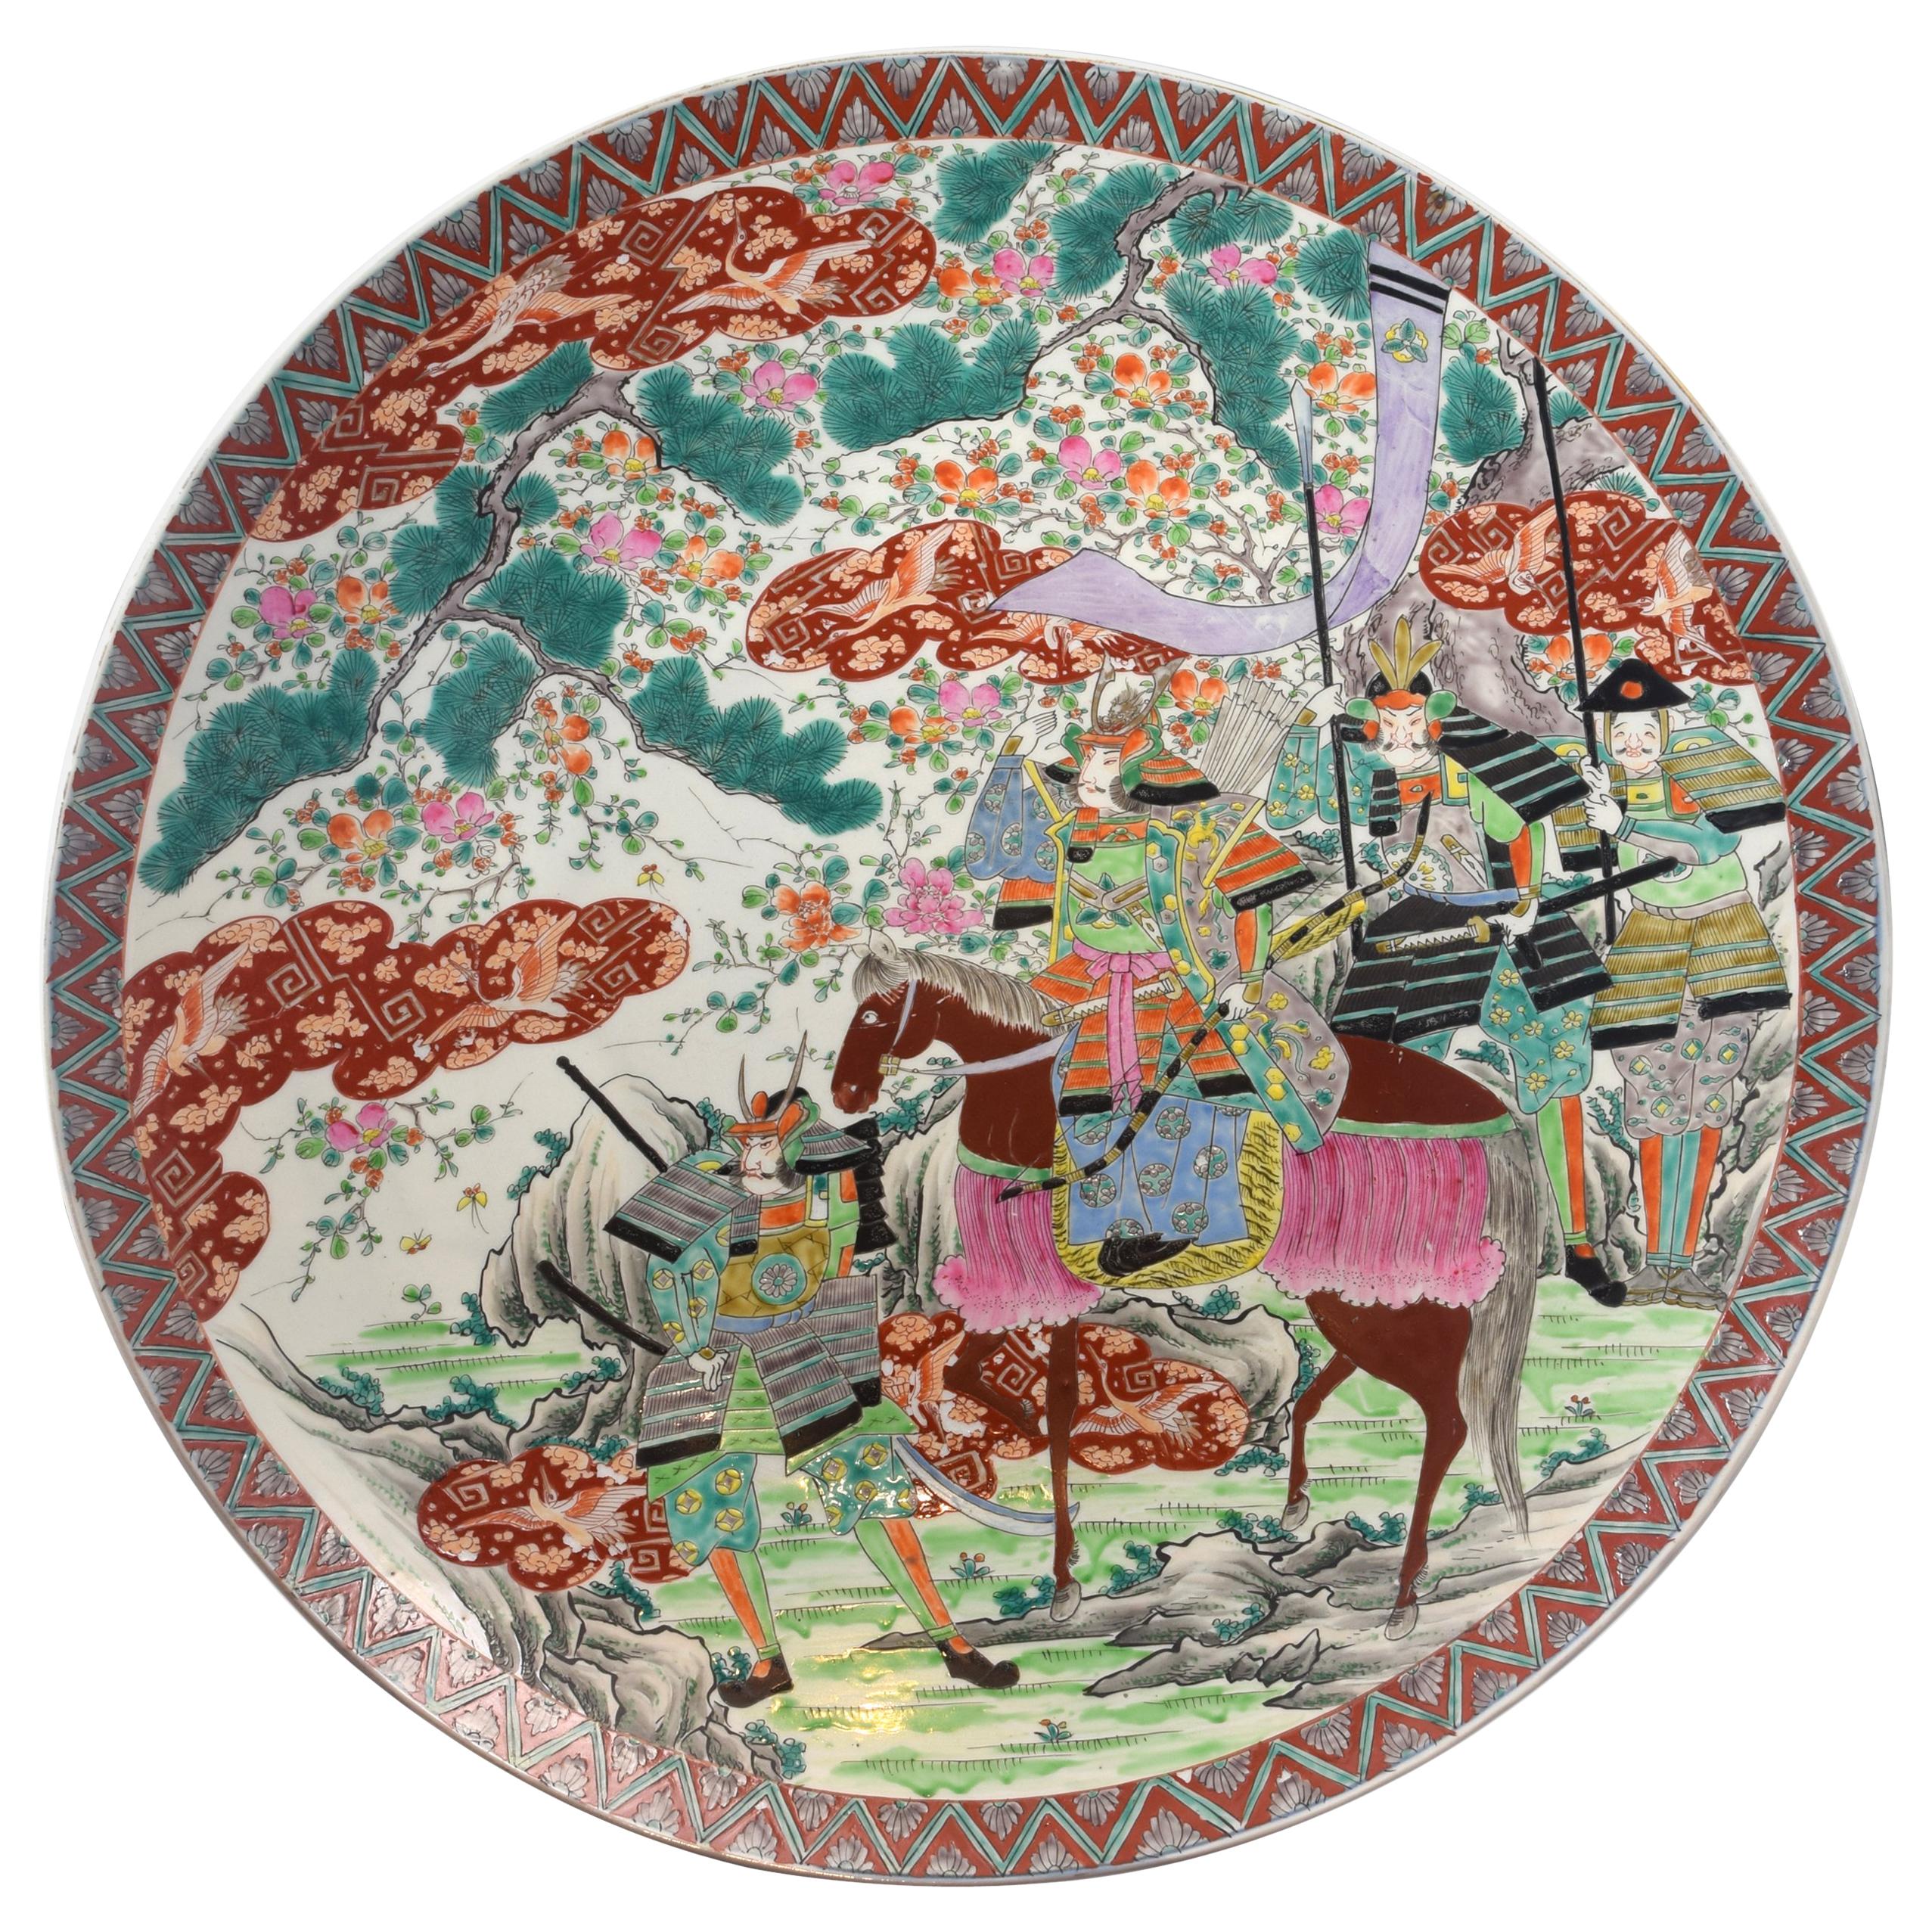 Charger or Plate. Porcelain. Possibly, Imari, Japan, 19th Century